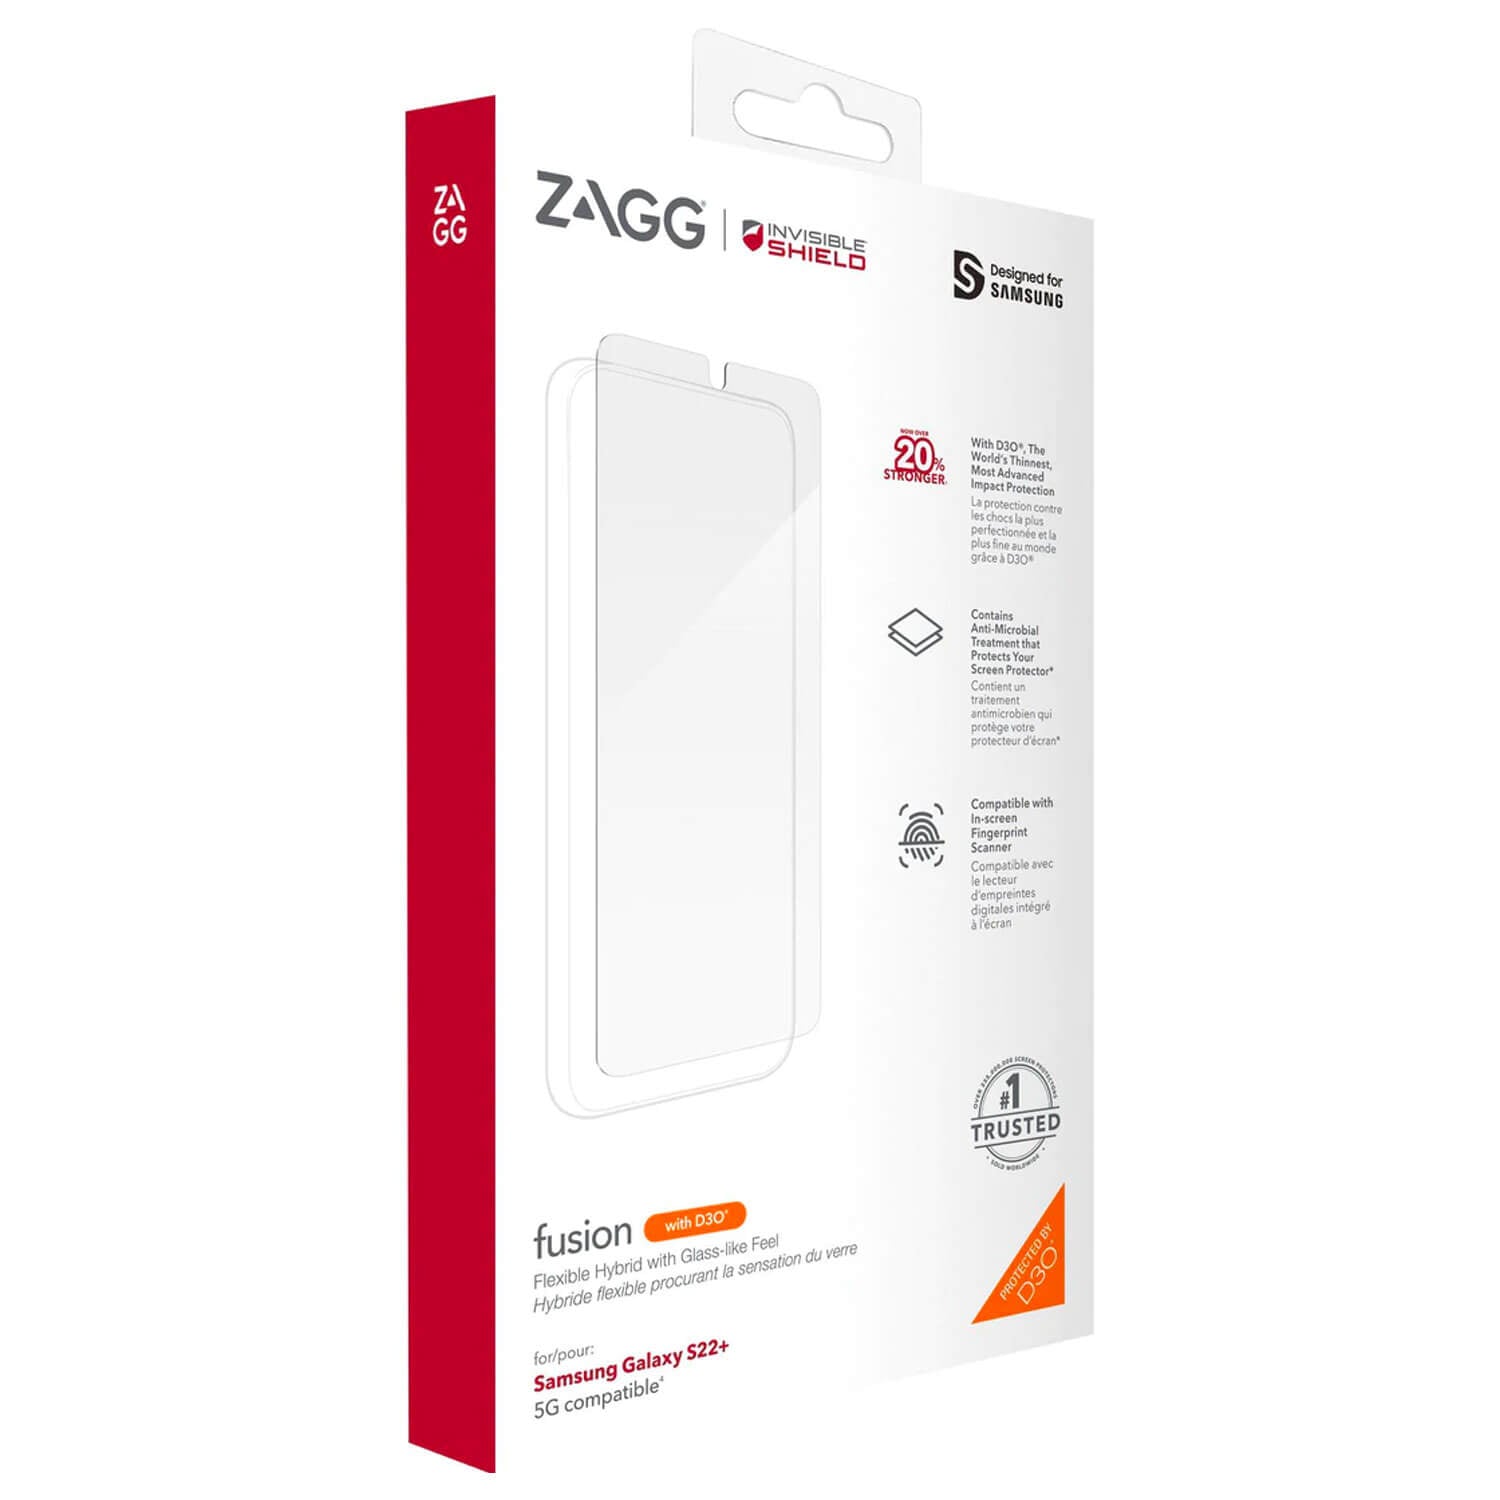 ZAGG InvisibleShield Samsung Galaxy S22 Plus 5G Screen Protector Fusion with D3O